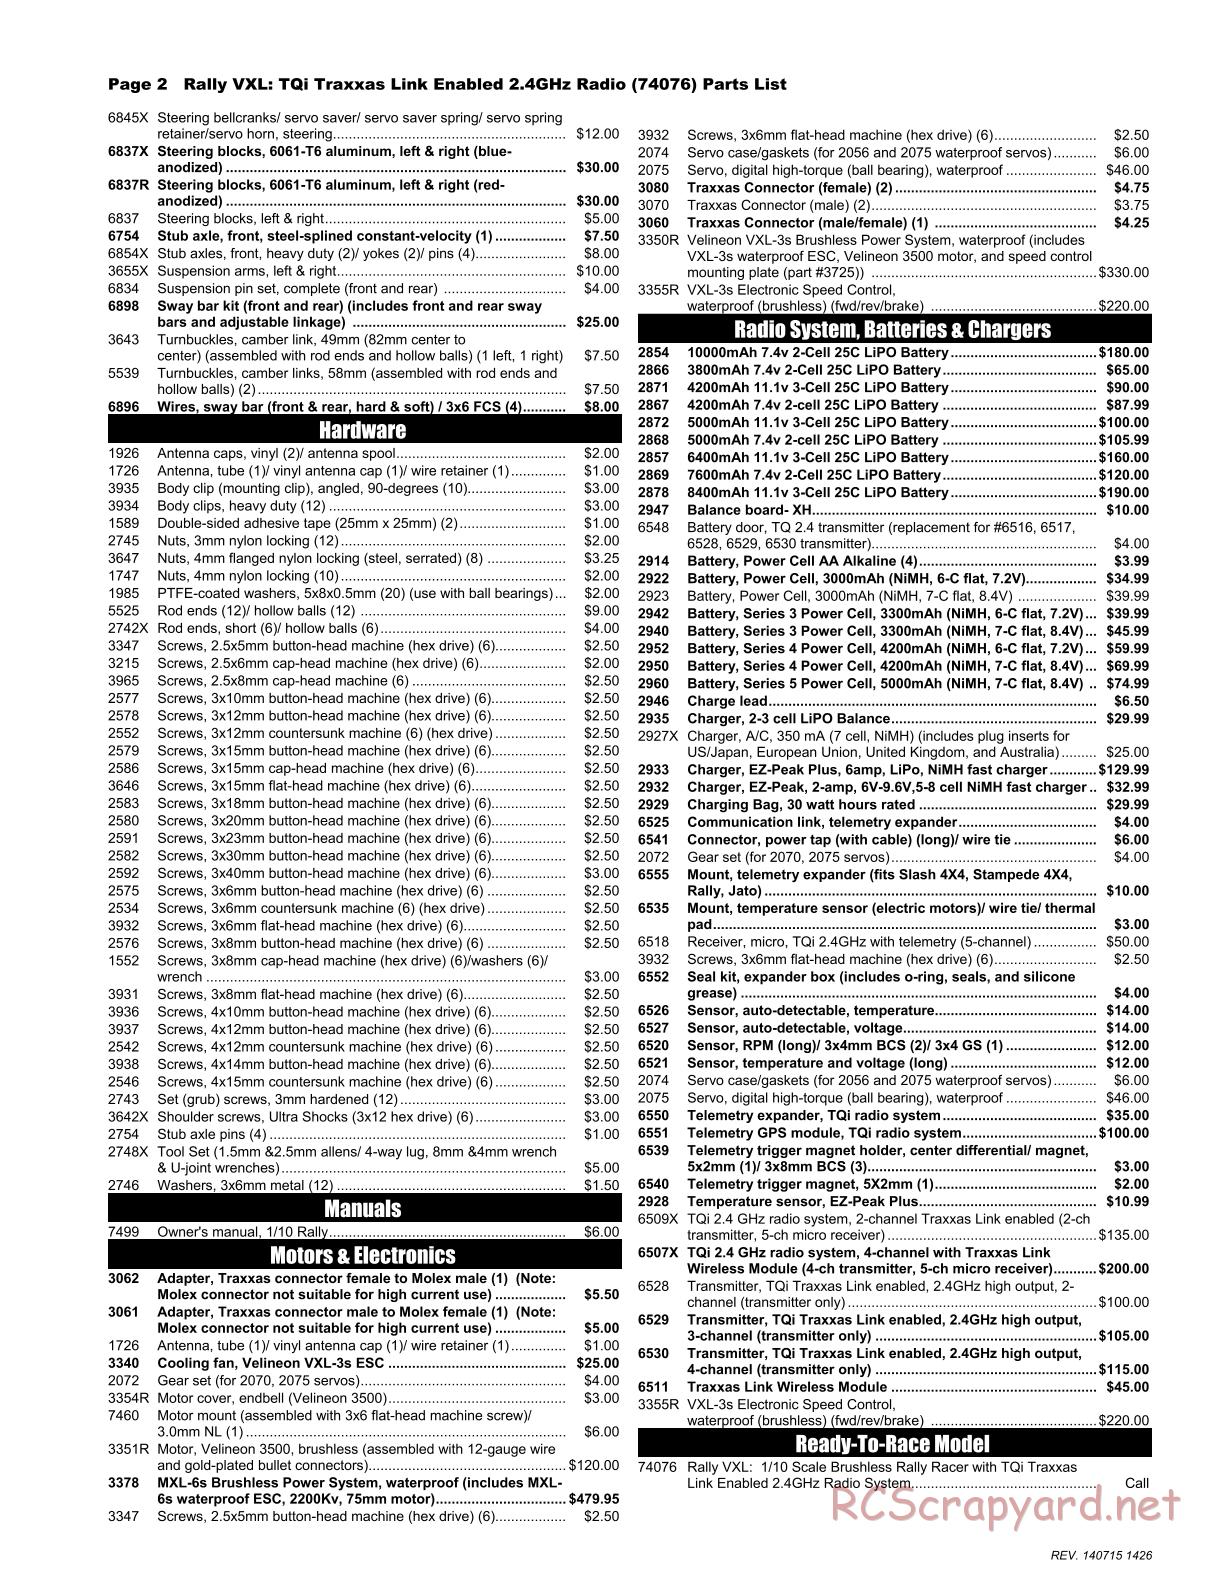 Traxxas - Rally (2014) - Parts List - Page 2